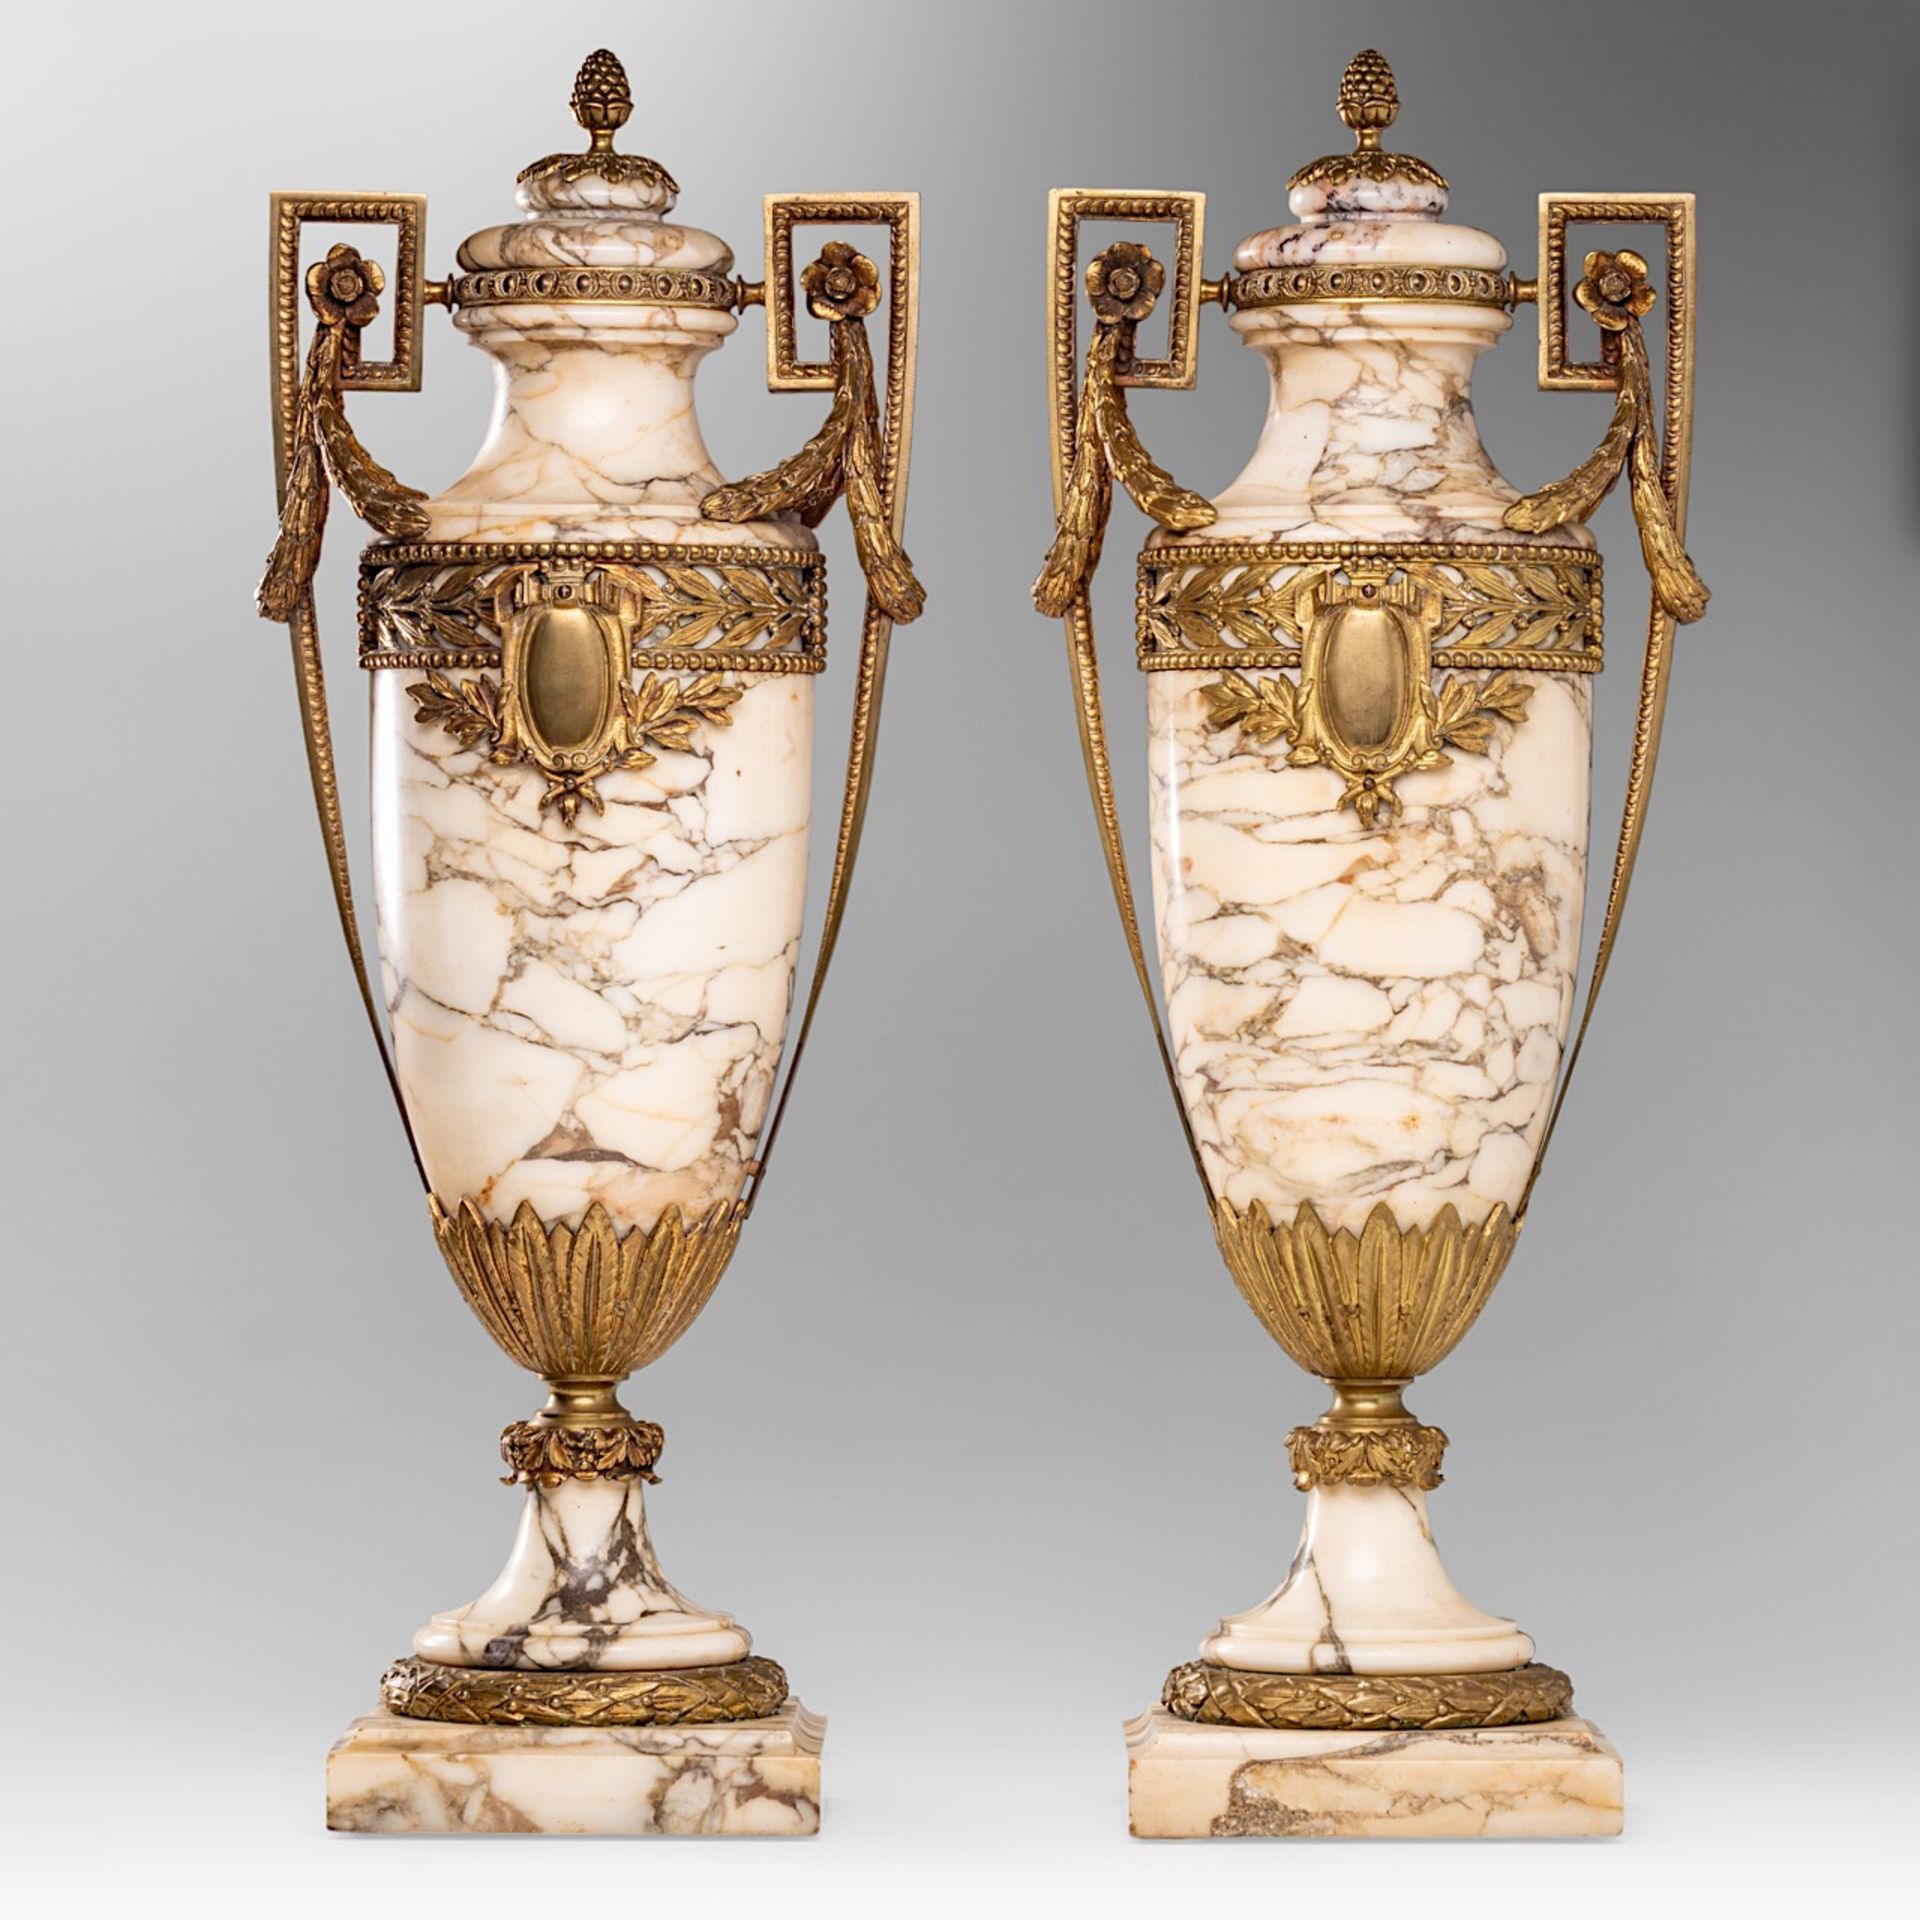 A pair of Neoclassical veined marble cassolettes with gilt brass mounts, H 61 cm - Image 4 of 7